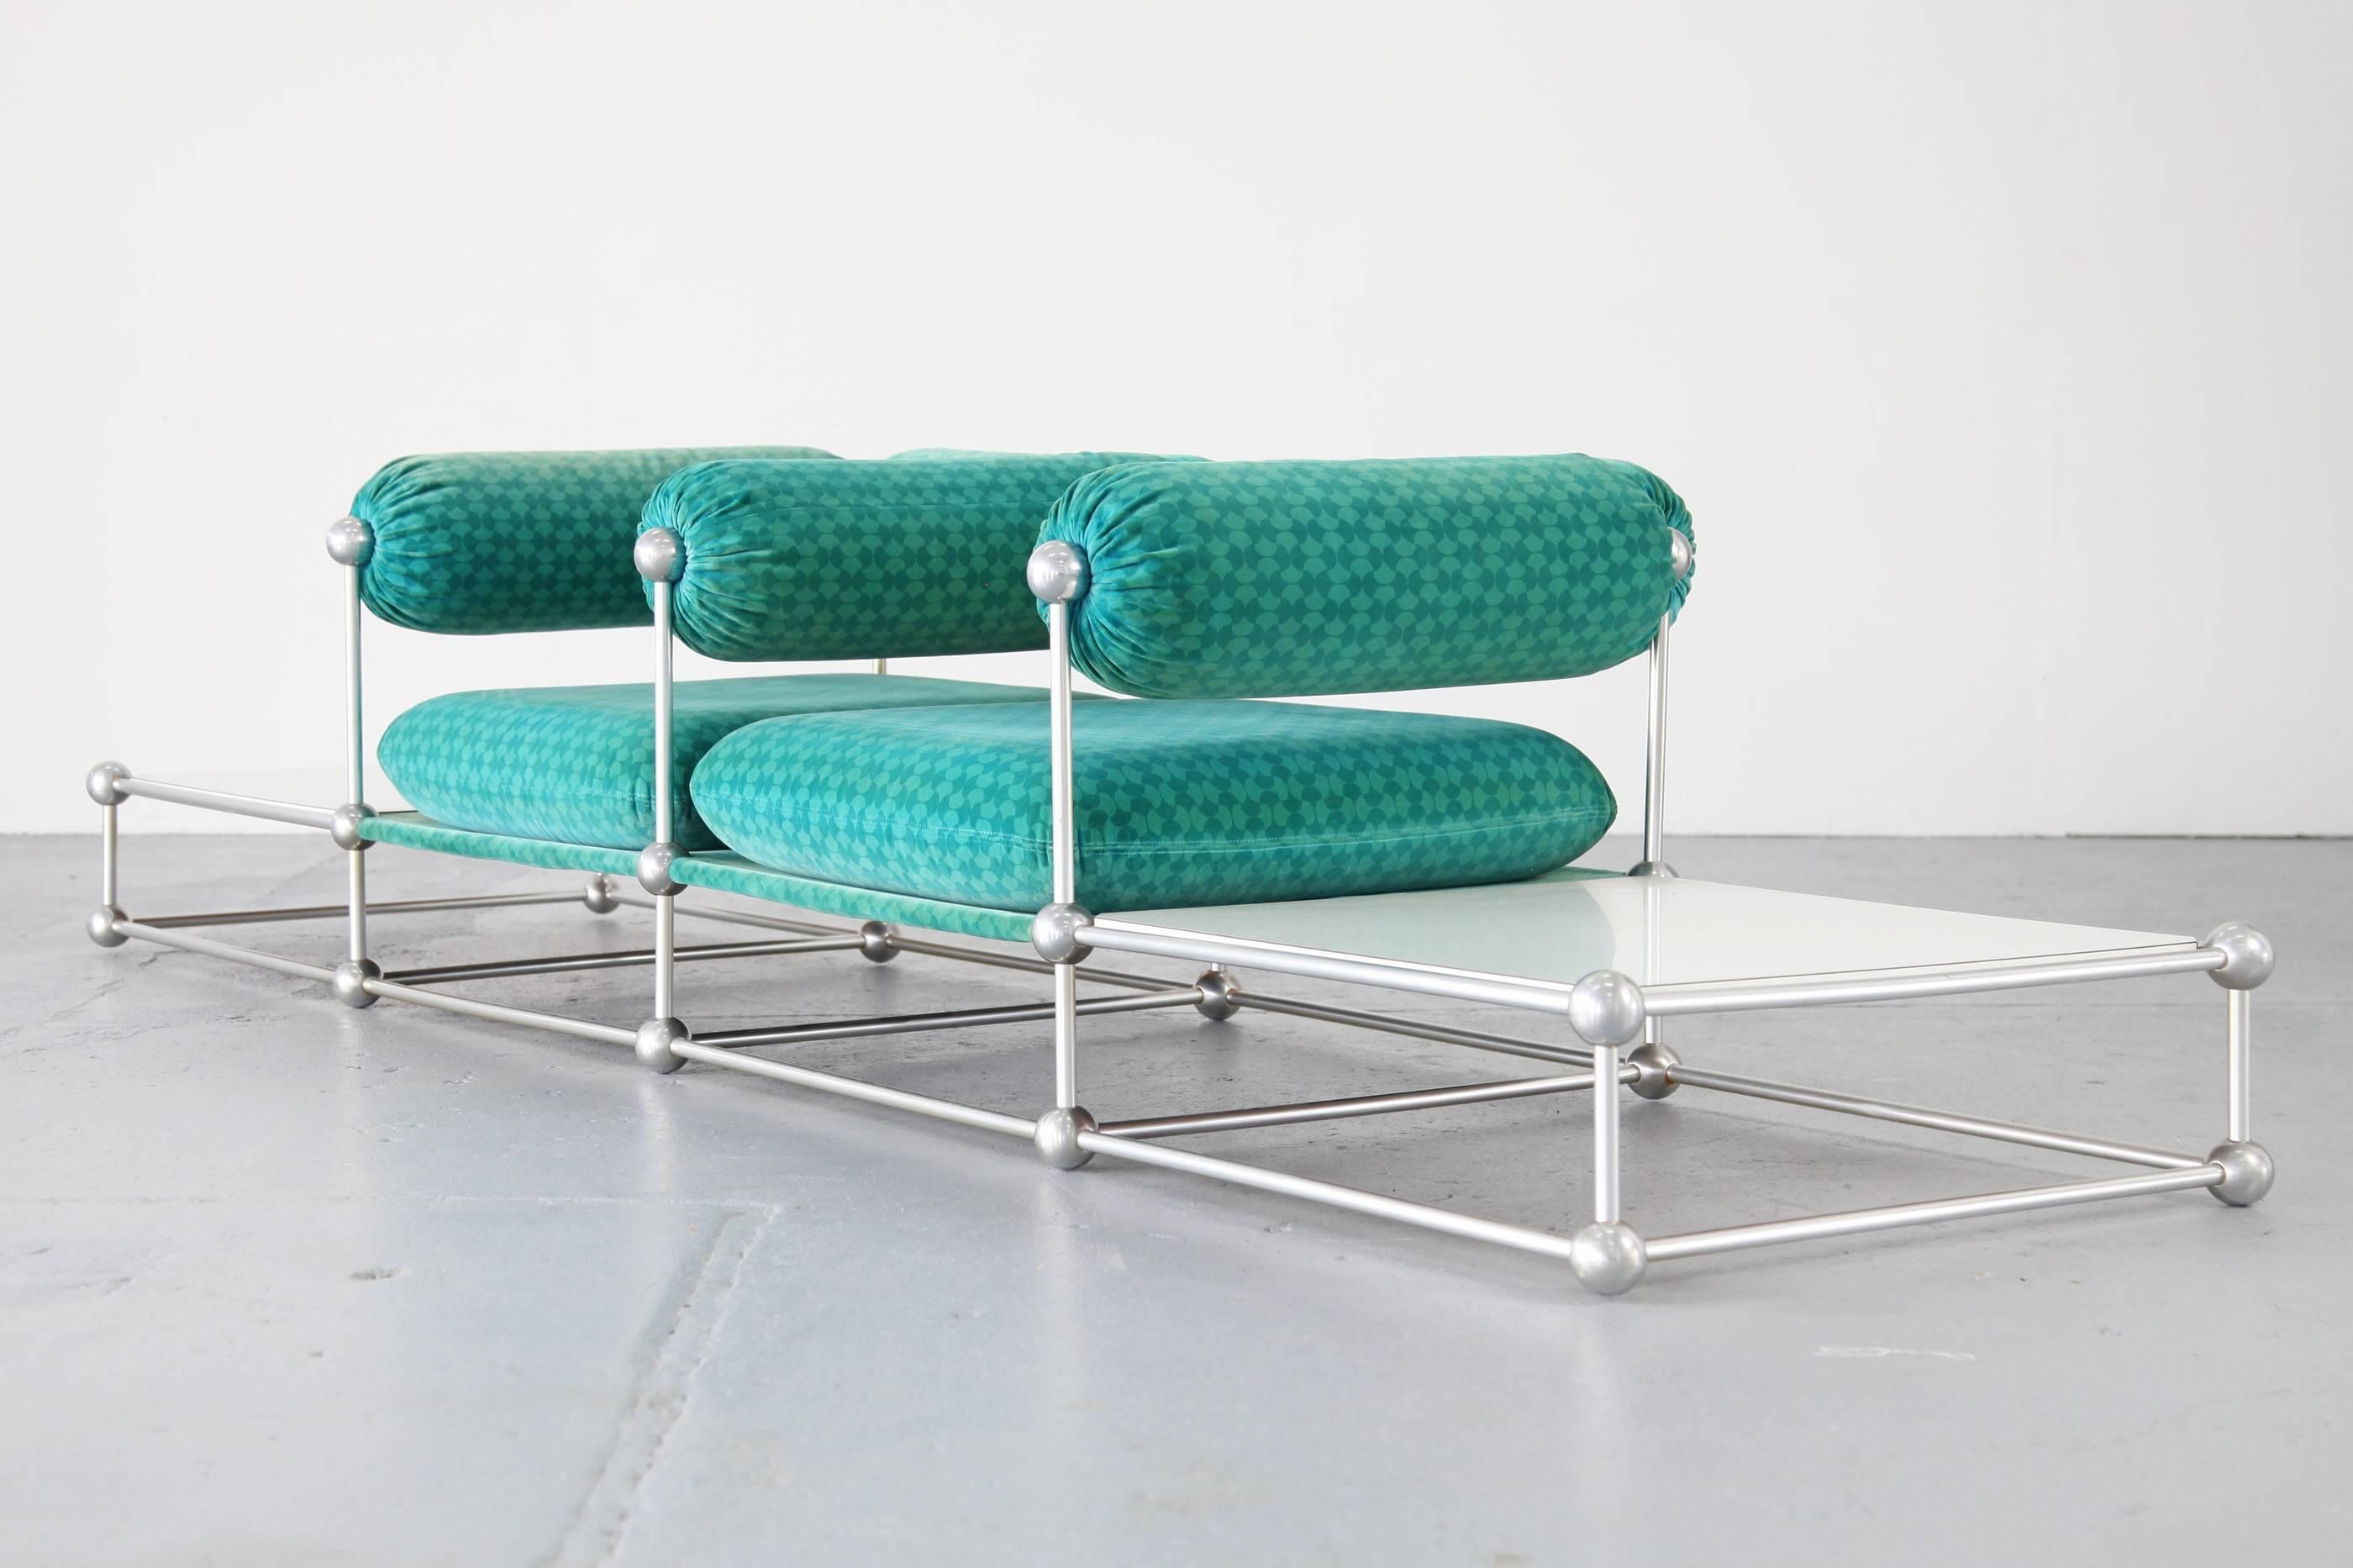 Mid-Century Modern Two-Seat Sofa with Tables S420 Modular Seating by Verner Panton for Thonet For Sale